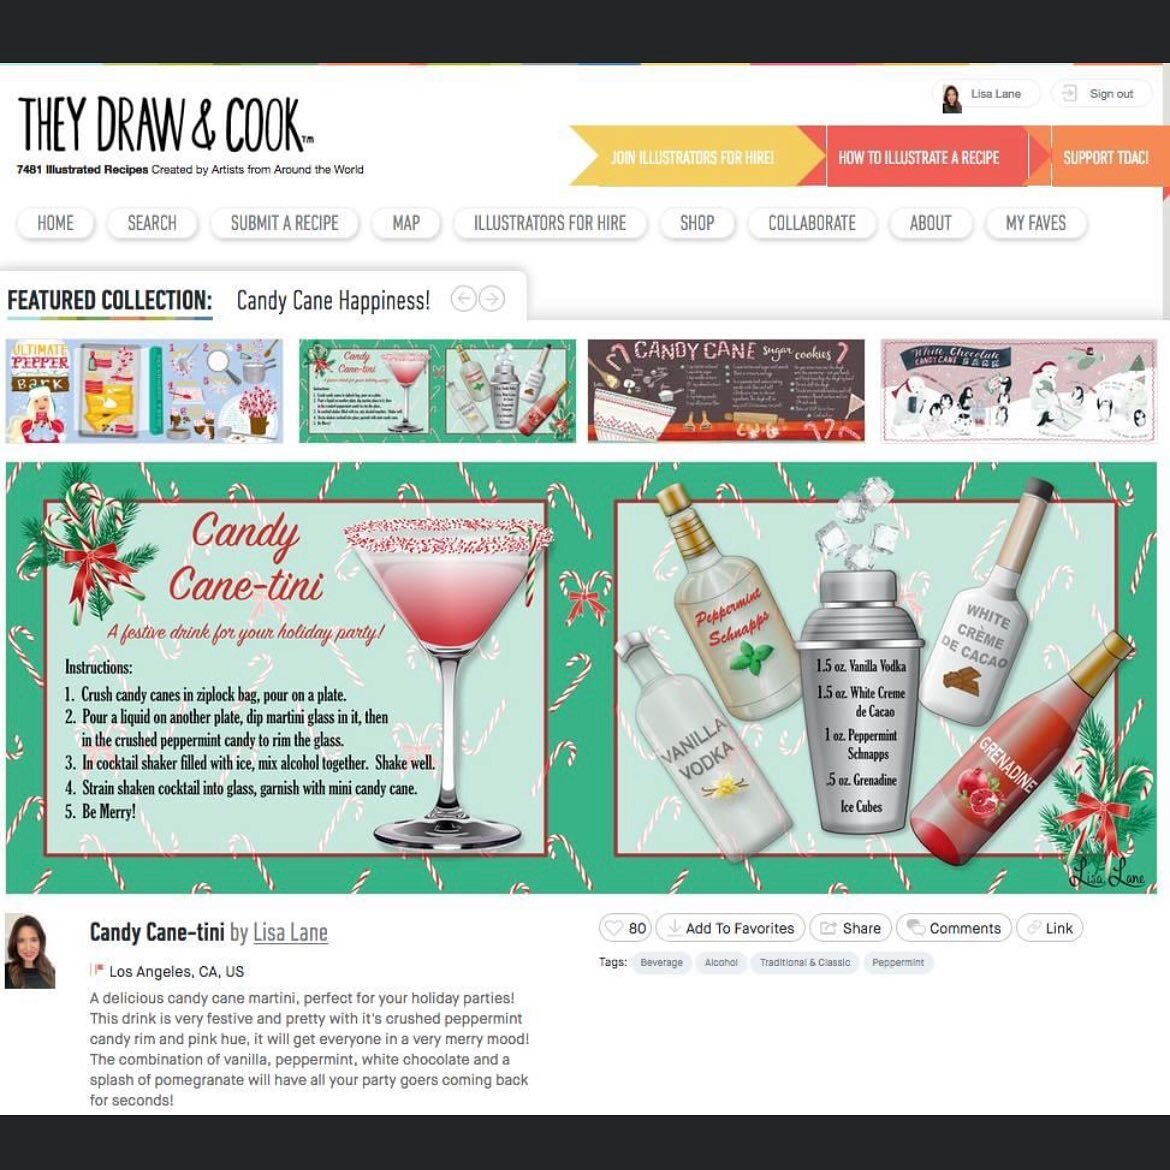 If you&rsquo;re looking for a festive holiday drink, here&rsquo;s a Candy Cane-tini I illustrated a couple years ago&hellip;I made this the other day and it was a hit with party guests! Swipe to see a pic of it, after a few sips were taken, so it&rsq